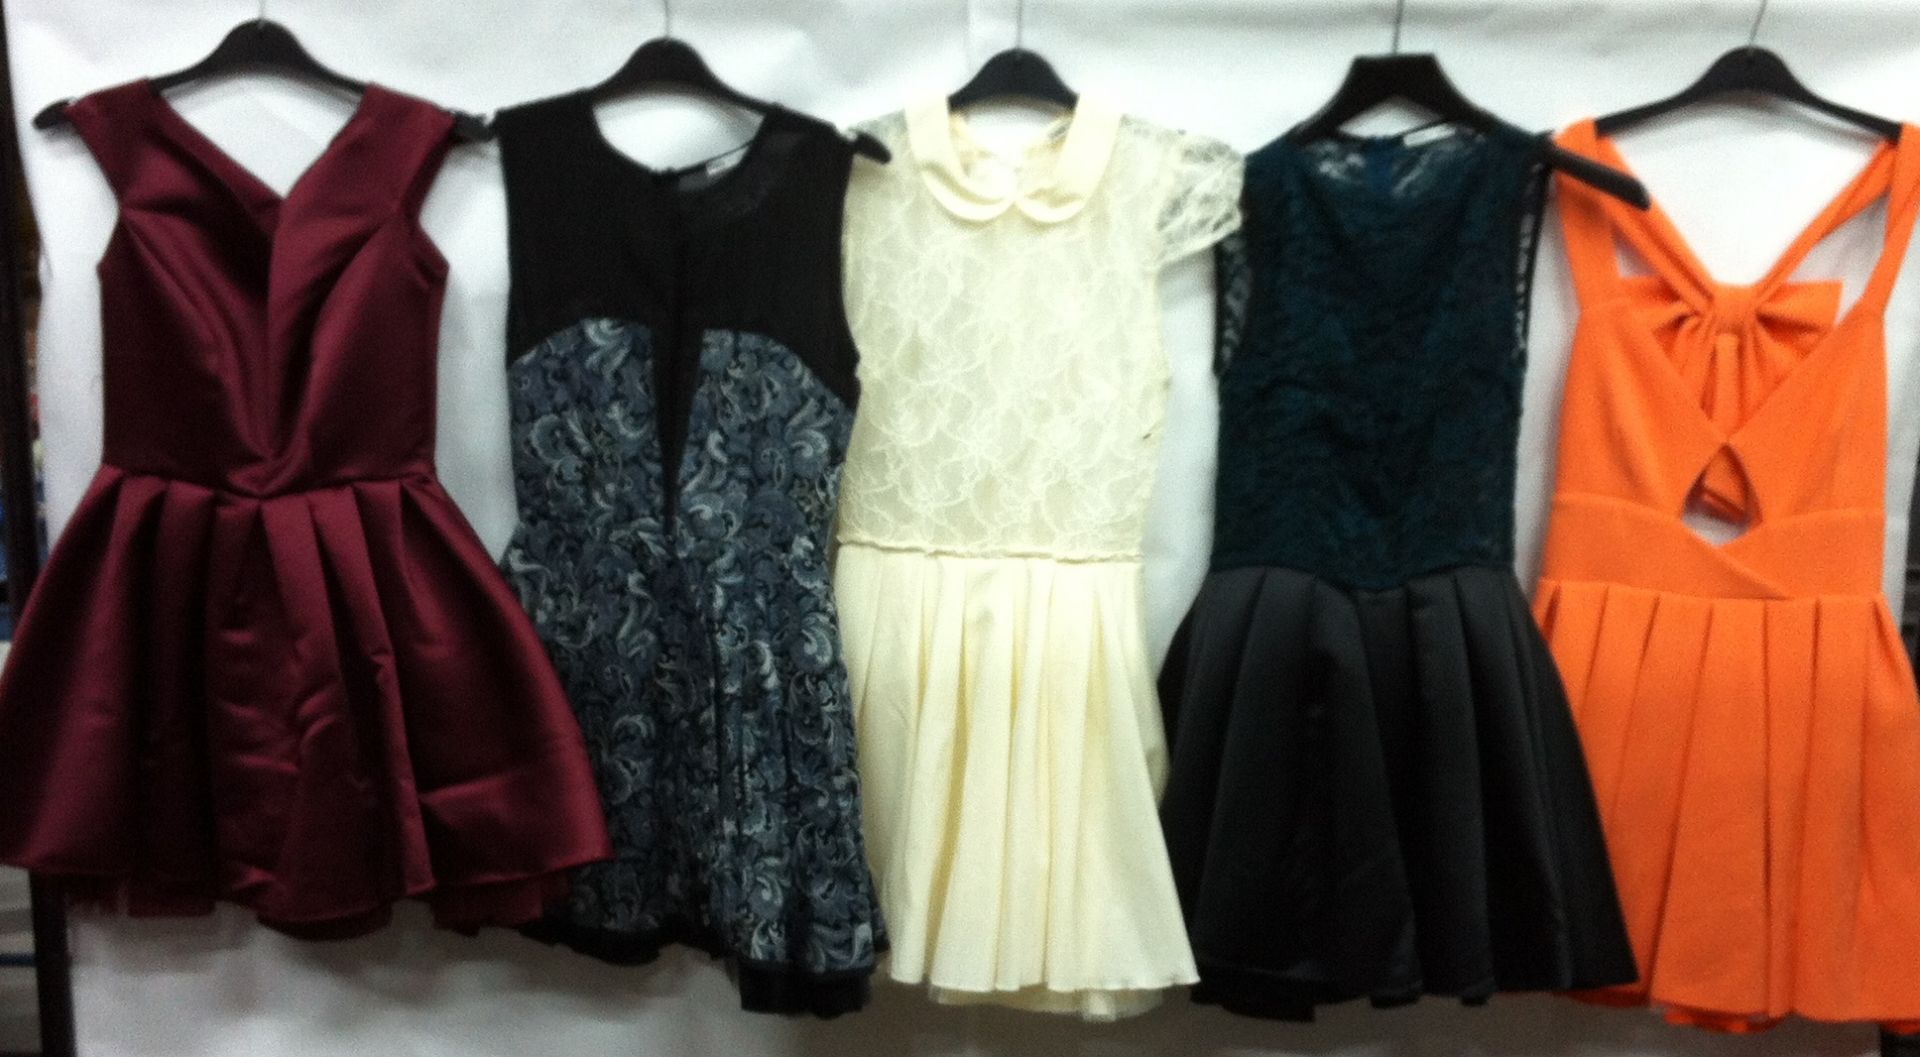 25 x Mixed Style Dresses - Image 3 of 3